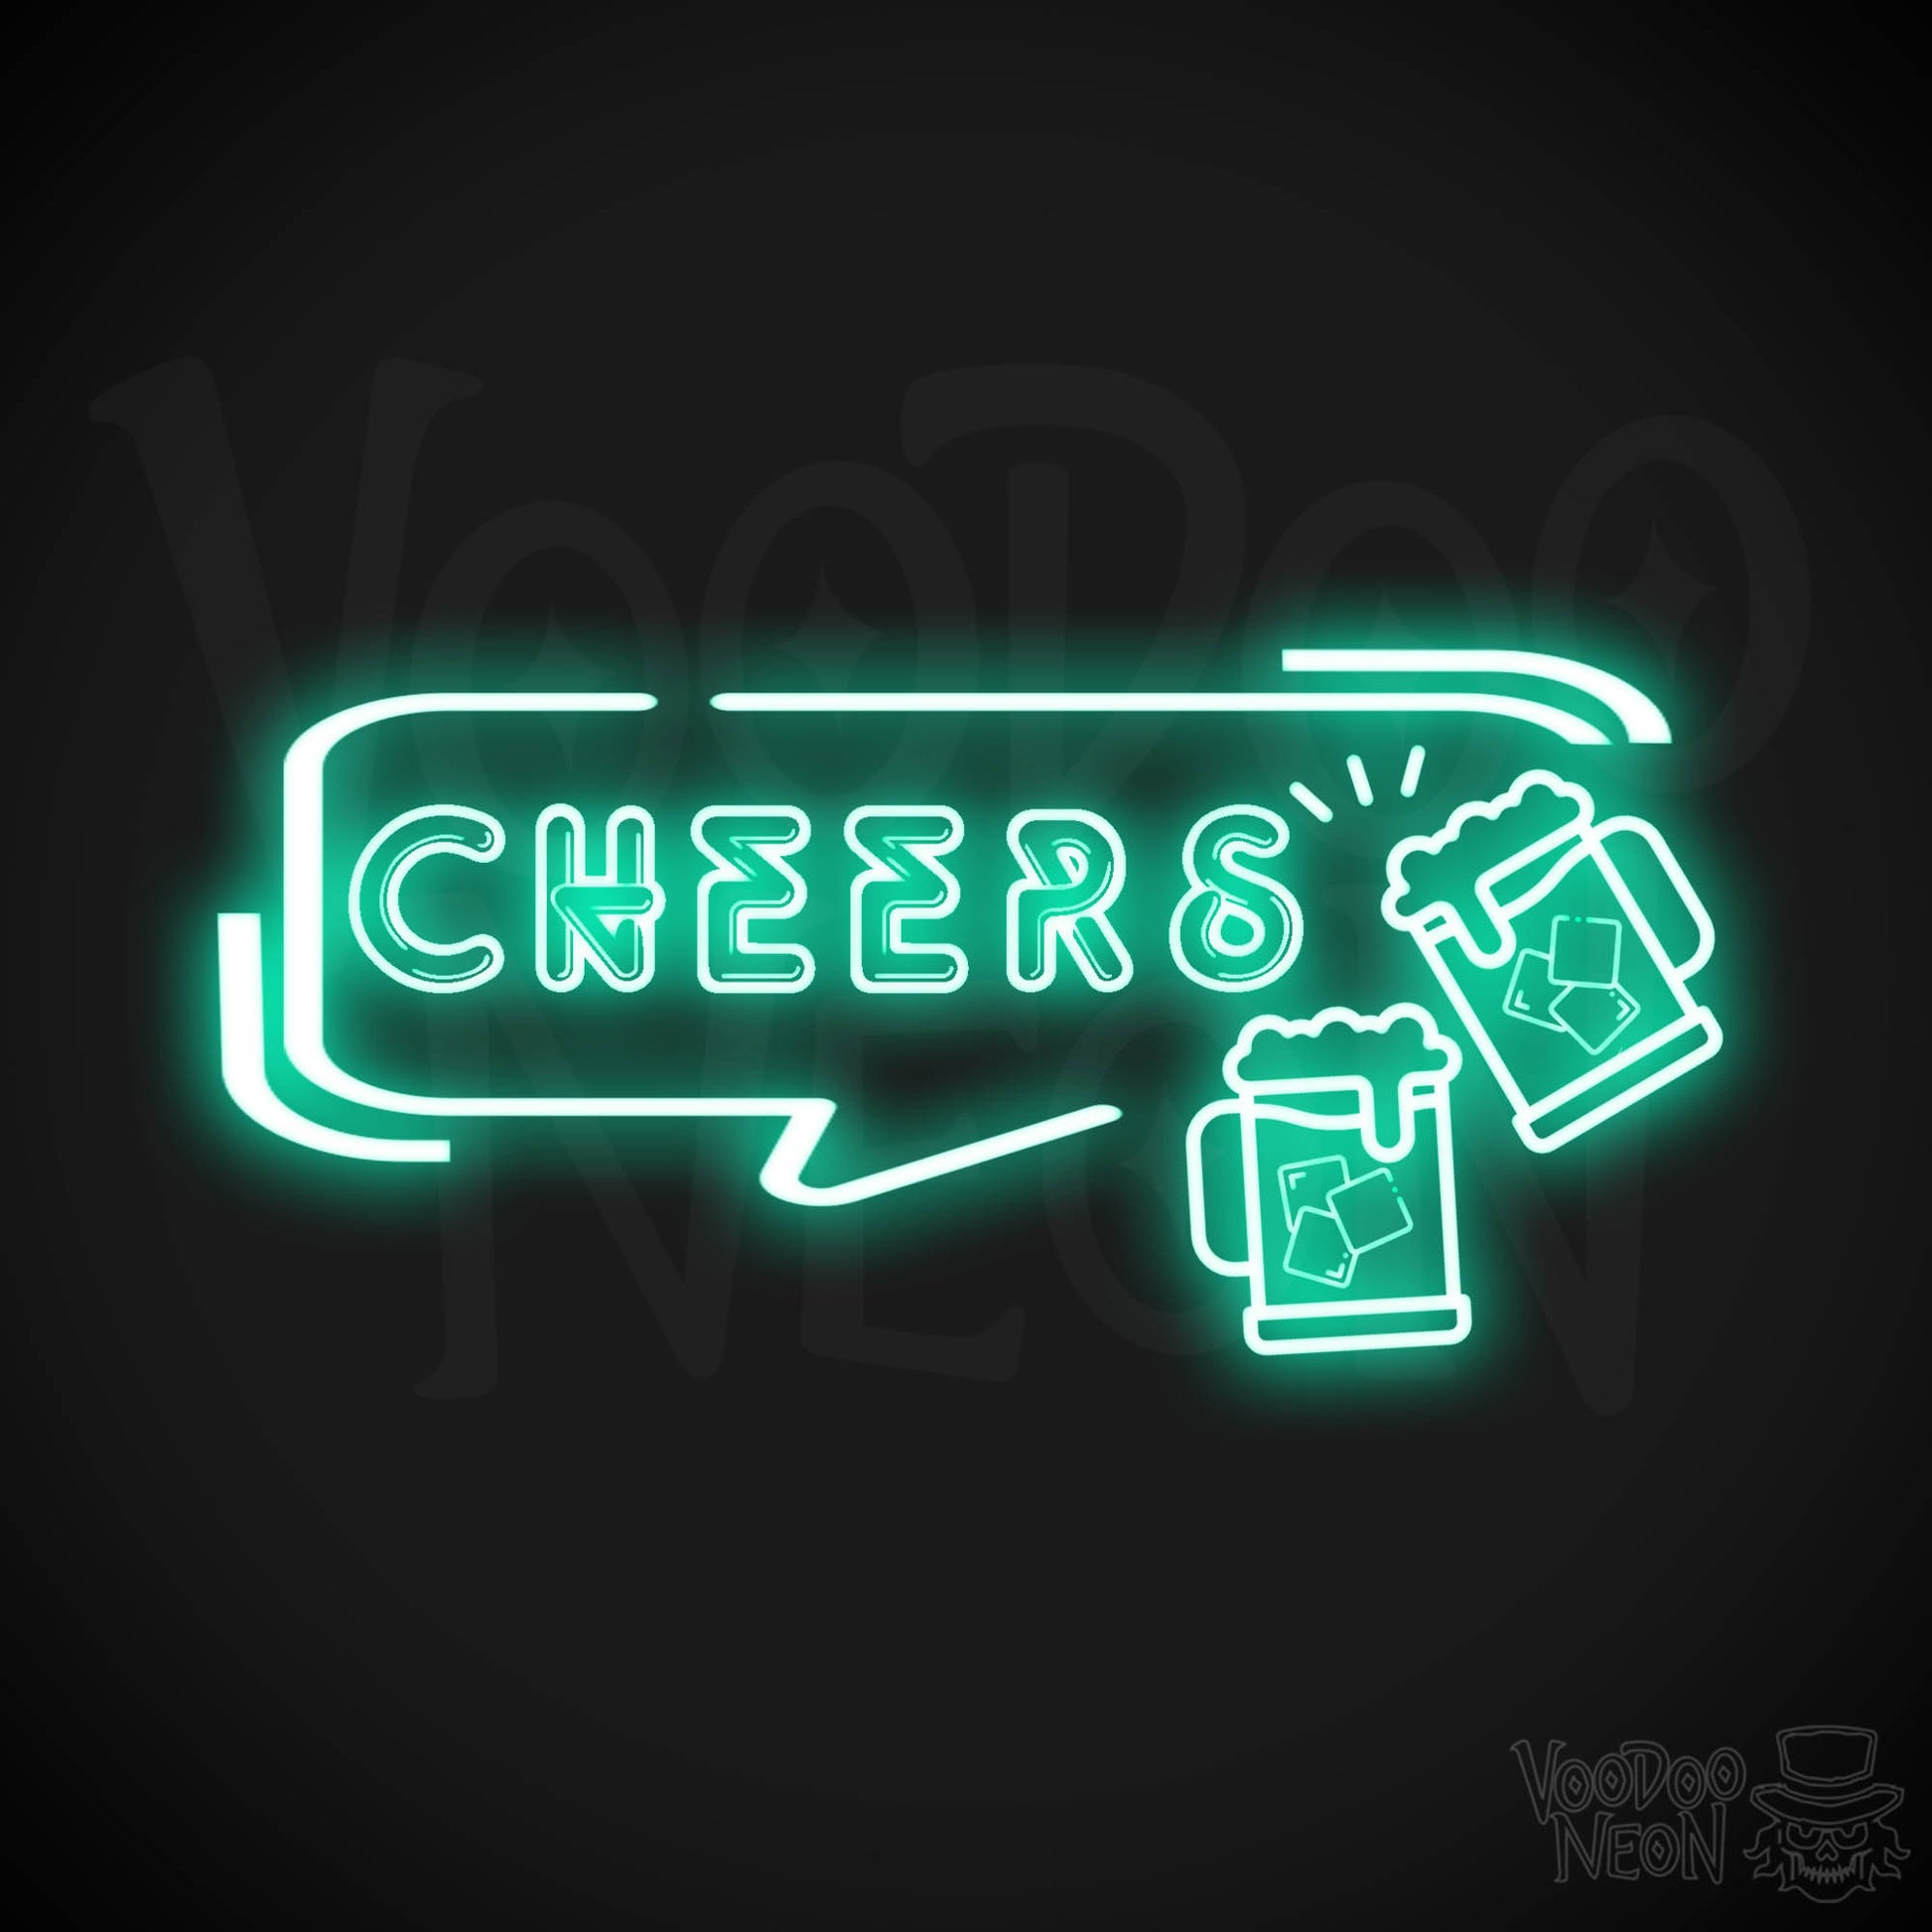 Cheers Neon Sign - Neon Cheers Bar Sign - LED Neon Wall Art - Color Light Green